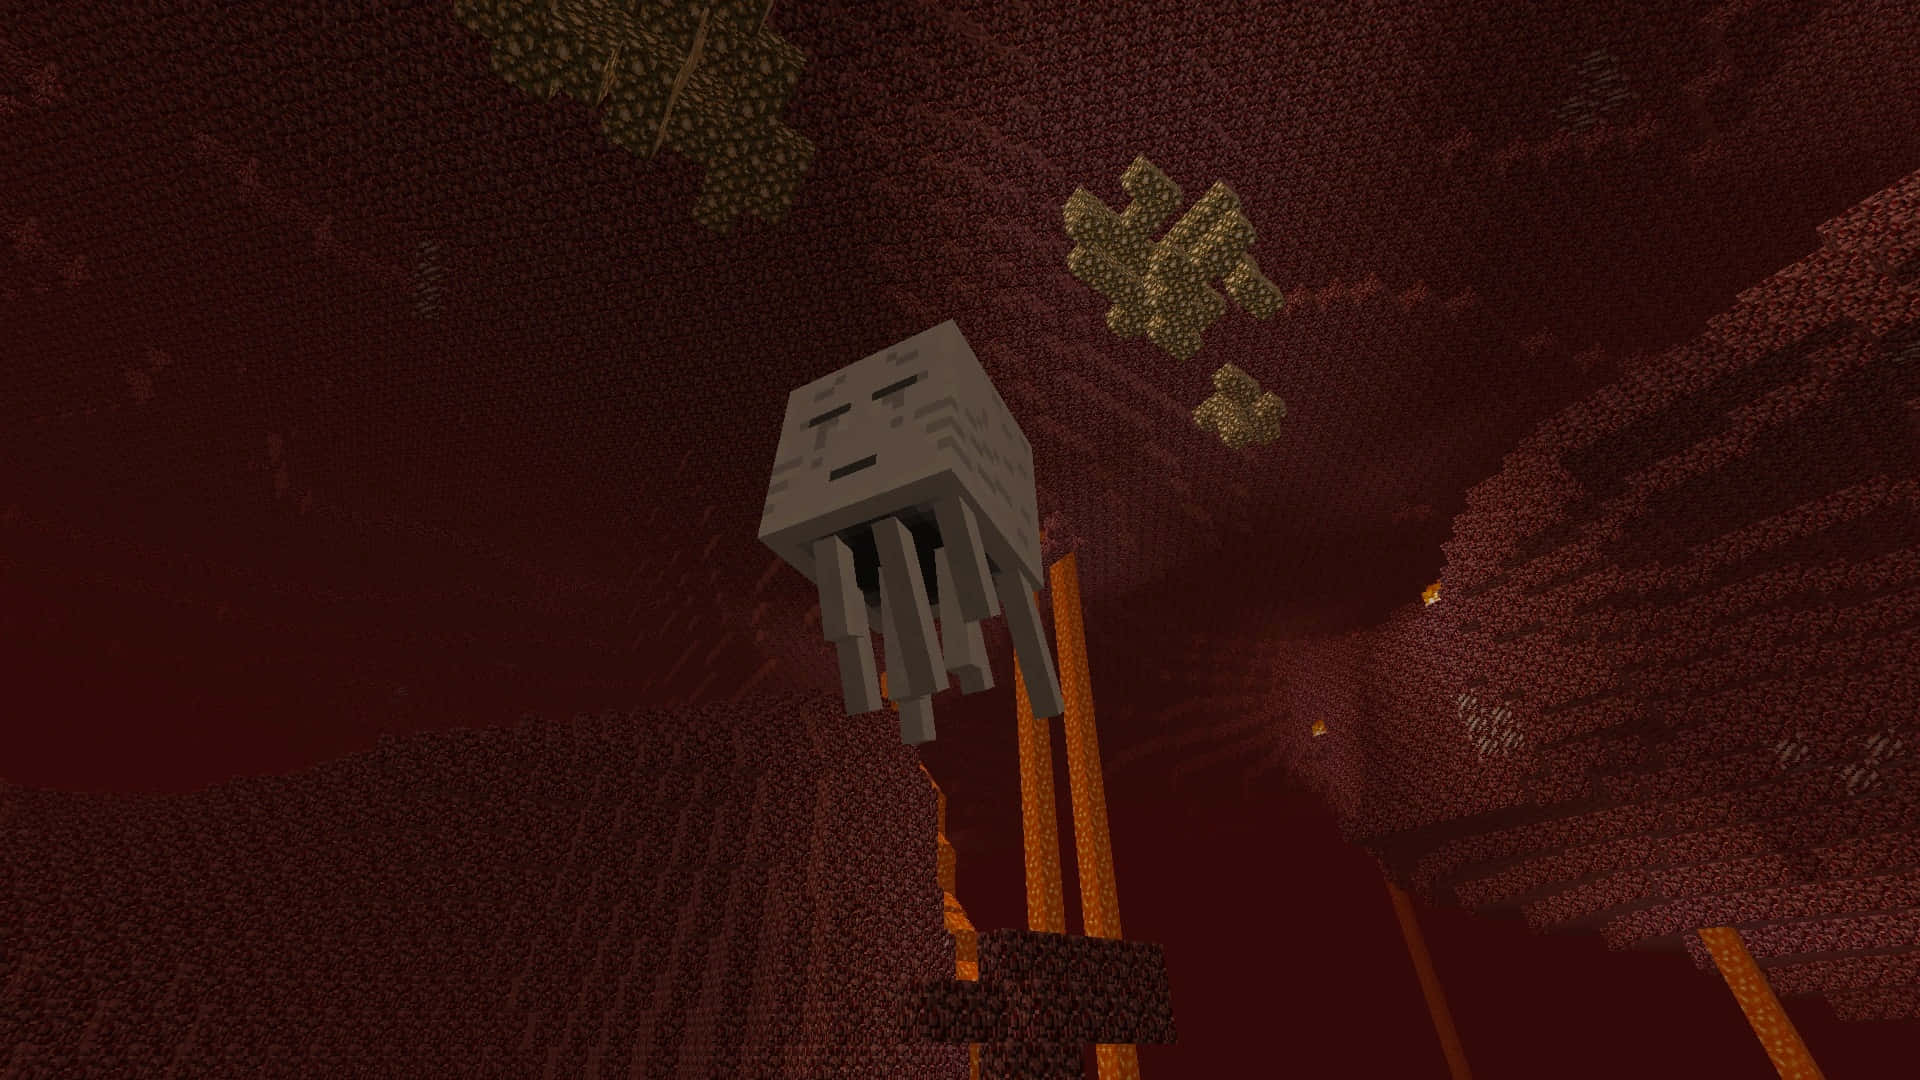 A Minecraft Ghast soaring through the Nether realm Wallpaper